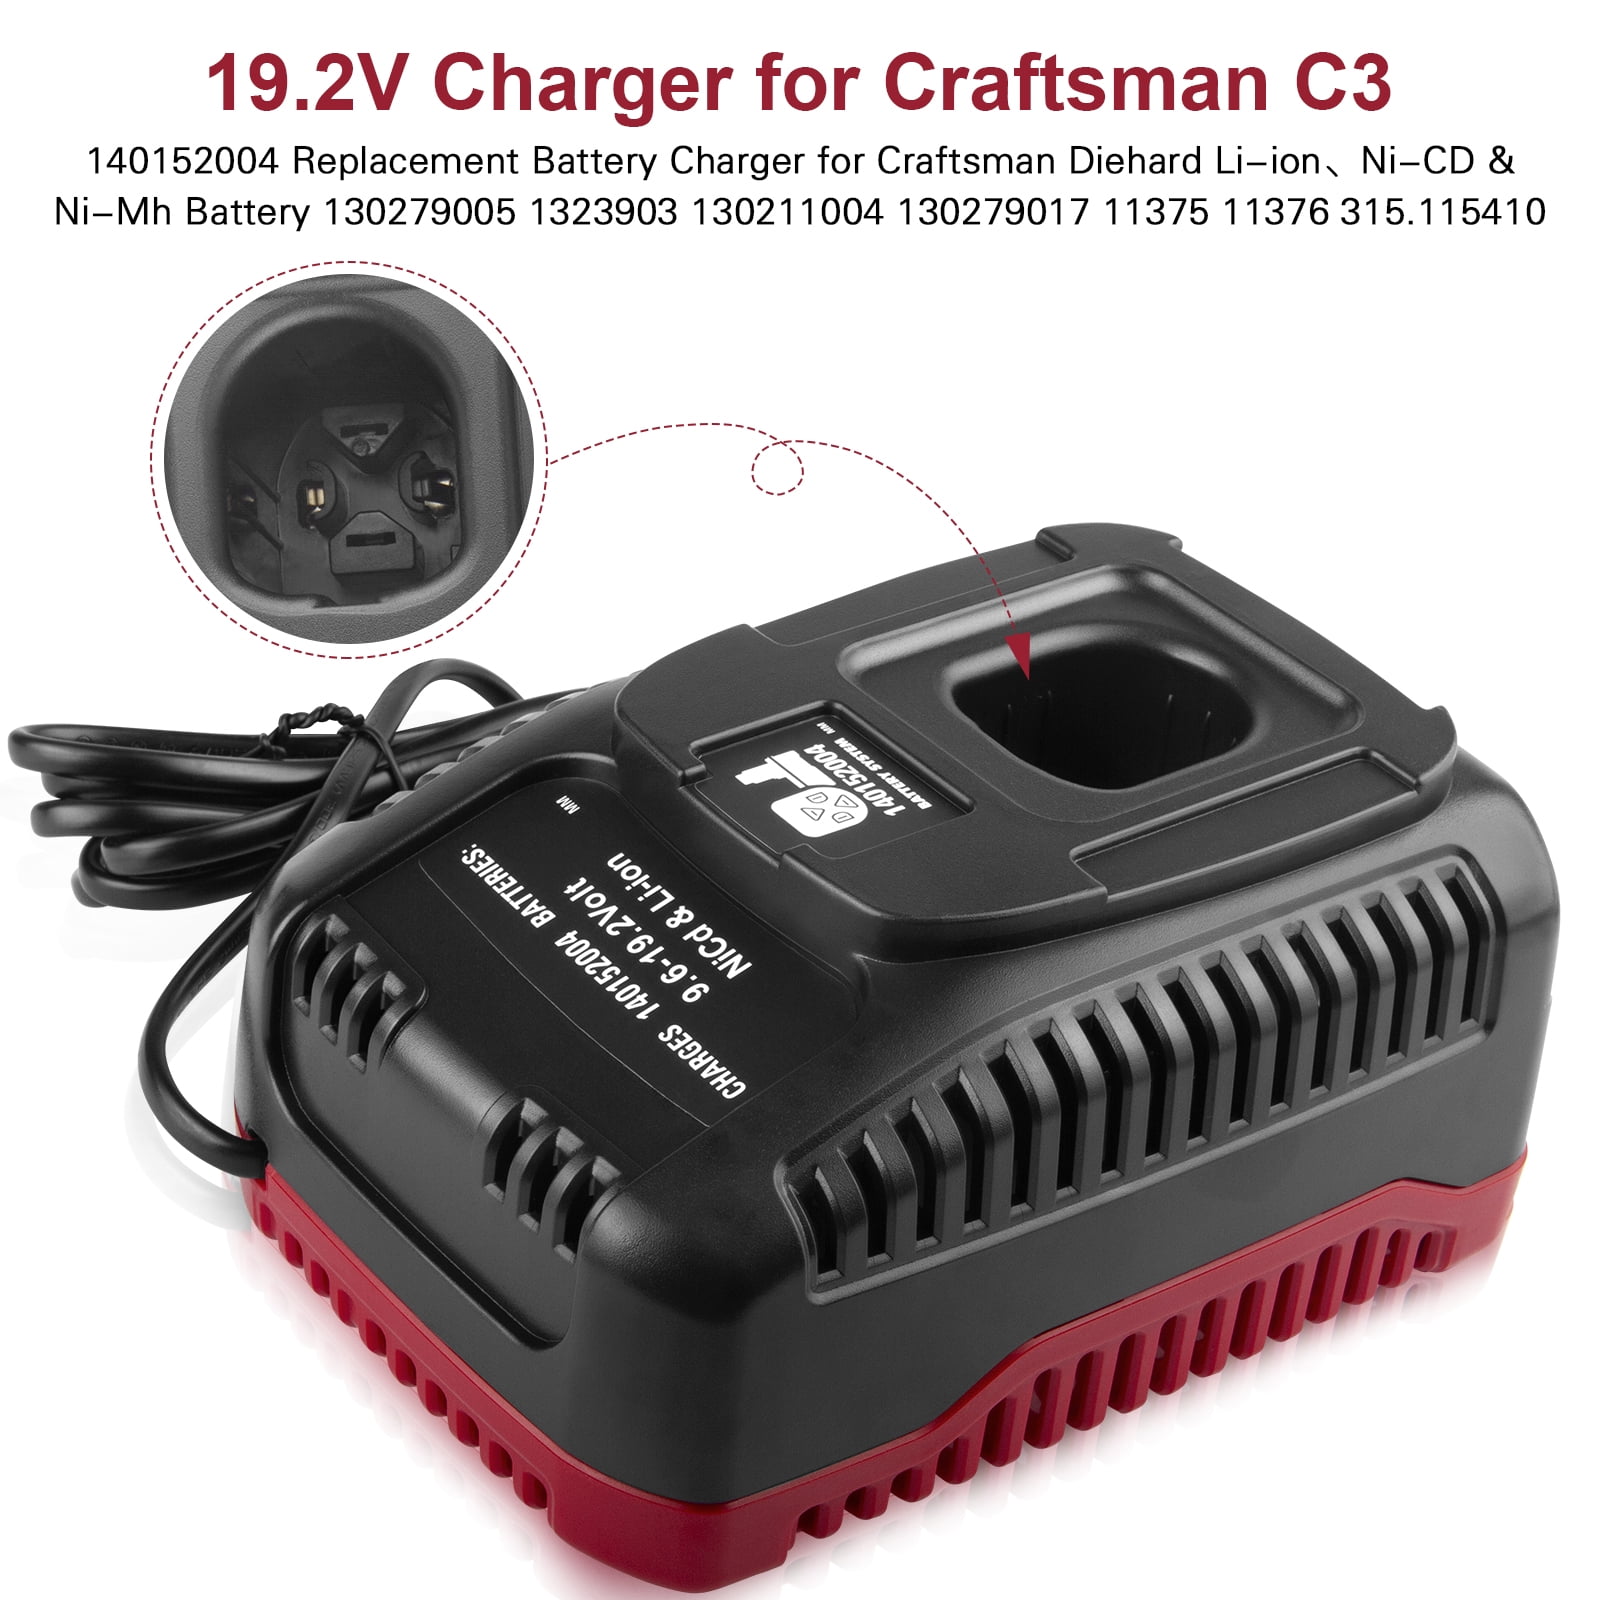 Replace Craftsman Charger for Craftsman C3 DieHard XCP battery 9.6V-19.2V Ni-cad Ni-Mh and Lithium 140152004 1425301 1323903 130279005 11375 11376 315.PP2011 